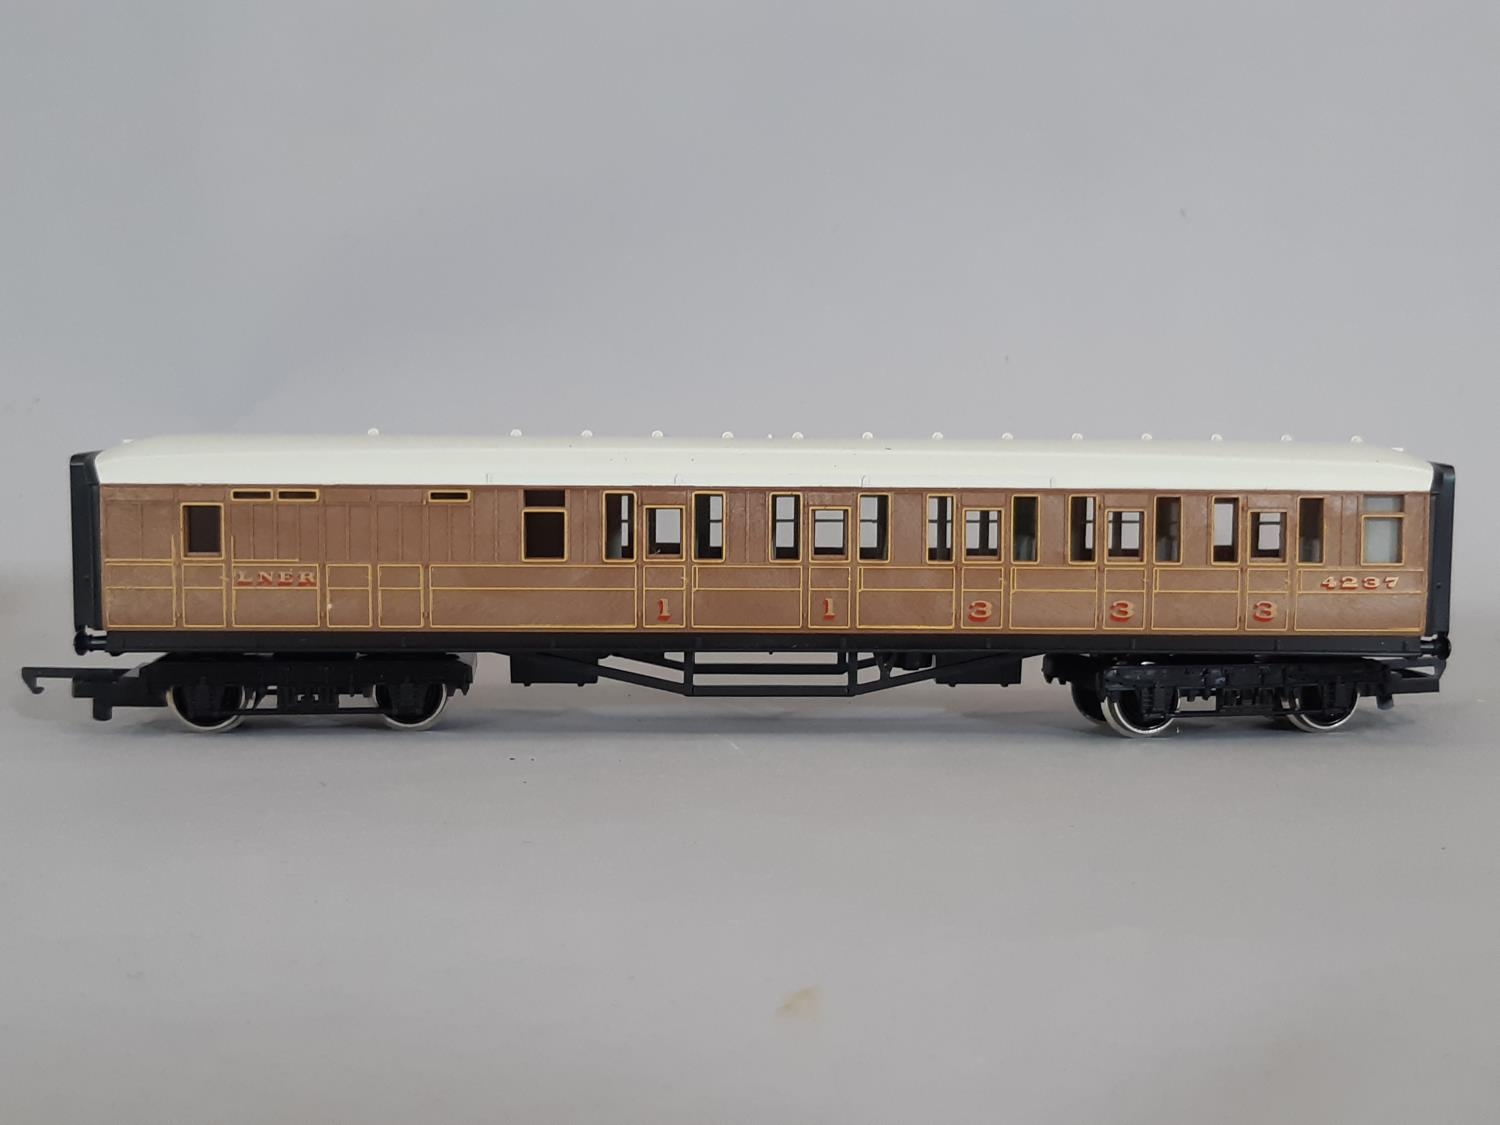 31 unboxed 00 gauge passenger coaches including Hornby Southern Green, LMS Maroon and LNER Teak etc, - Image 6 of 6